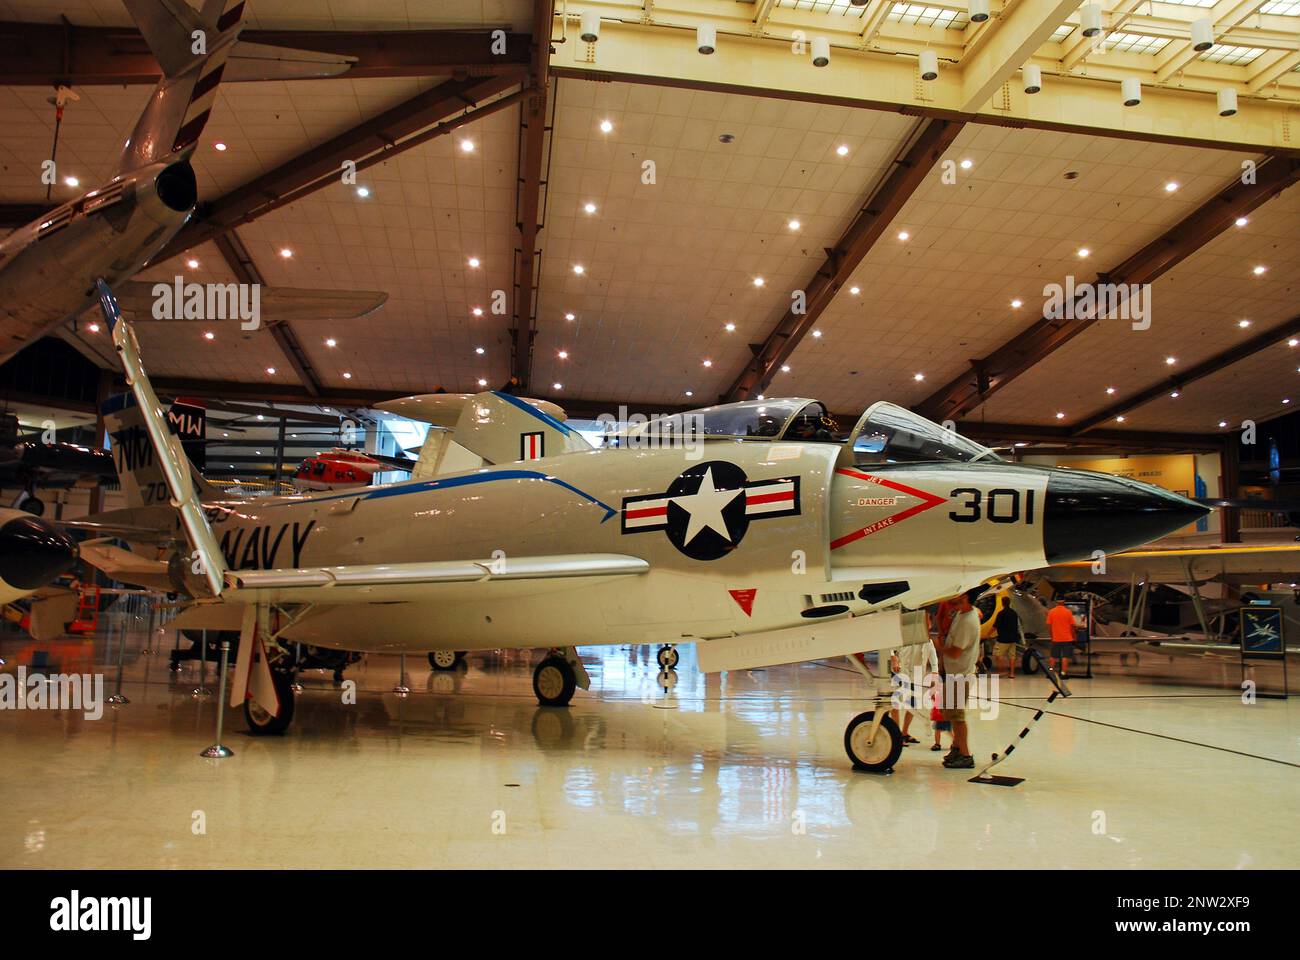 A Douglas A4D Skyhawk military jet airplane is on display at the National Museum of Naval Aviation in Pensacola, Florida Stock Photo